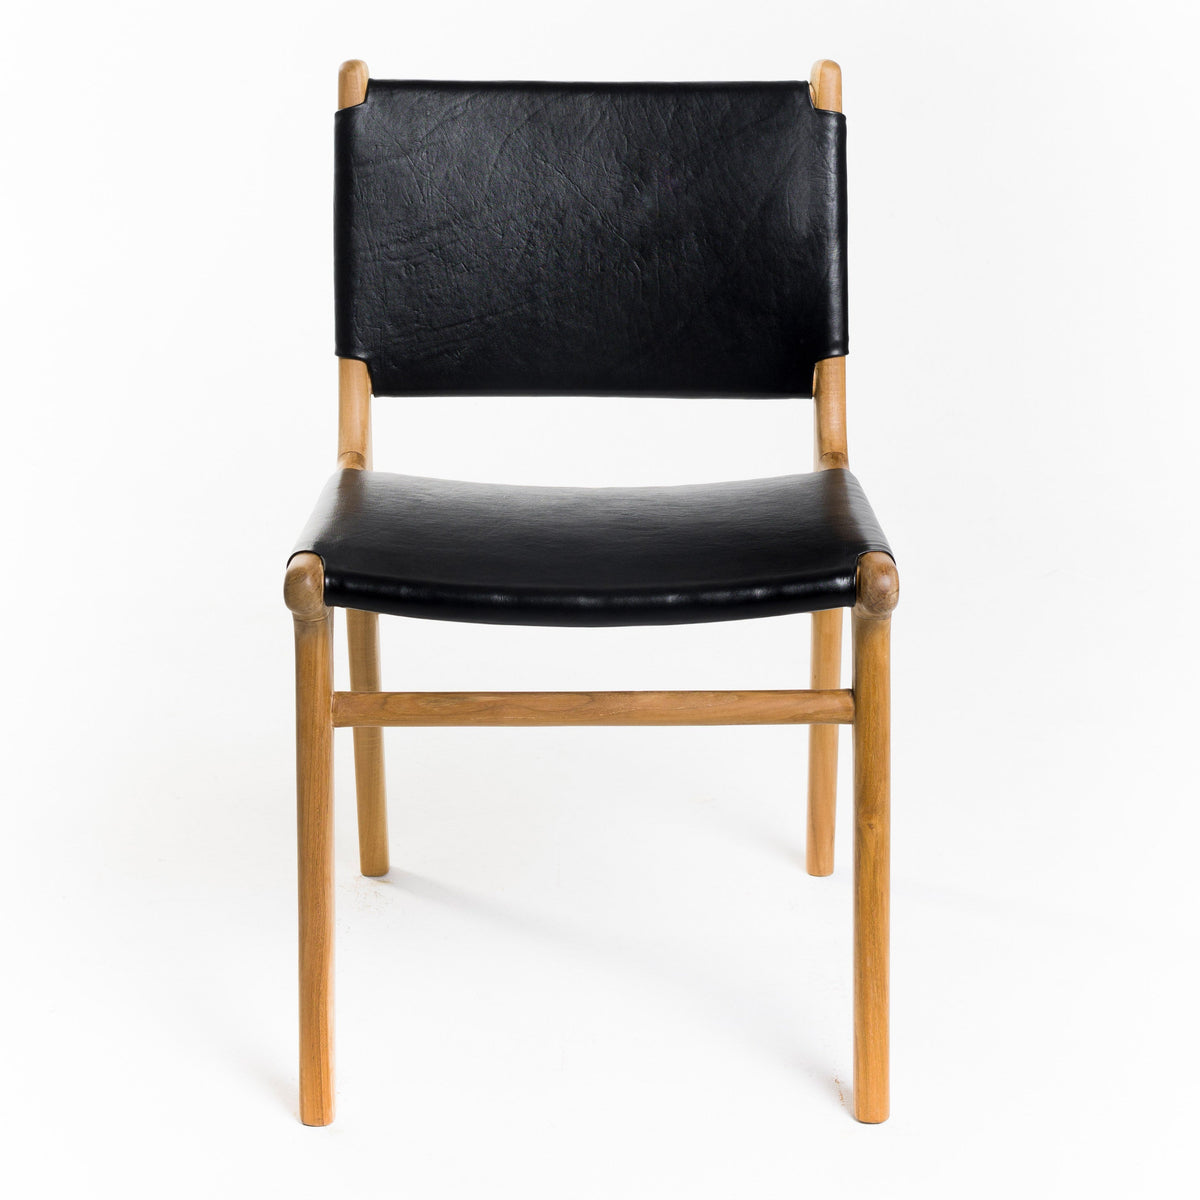 Clearance - Spensley Dining Chair - Black